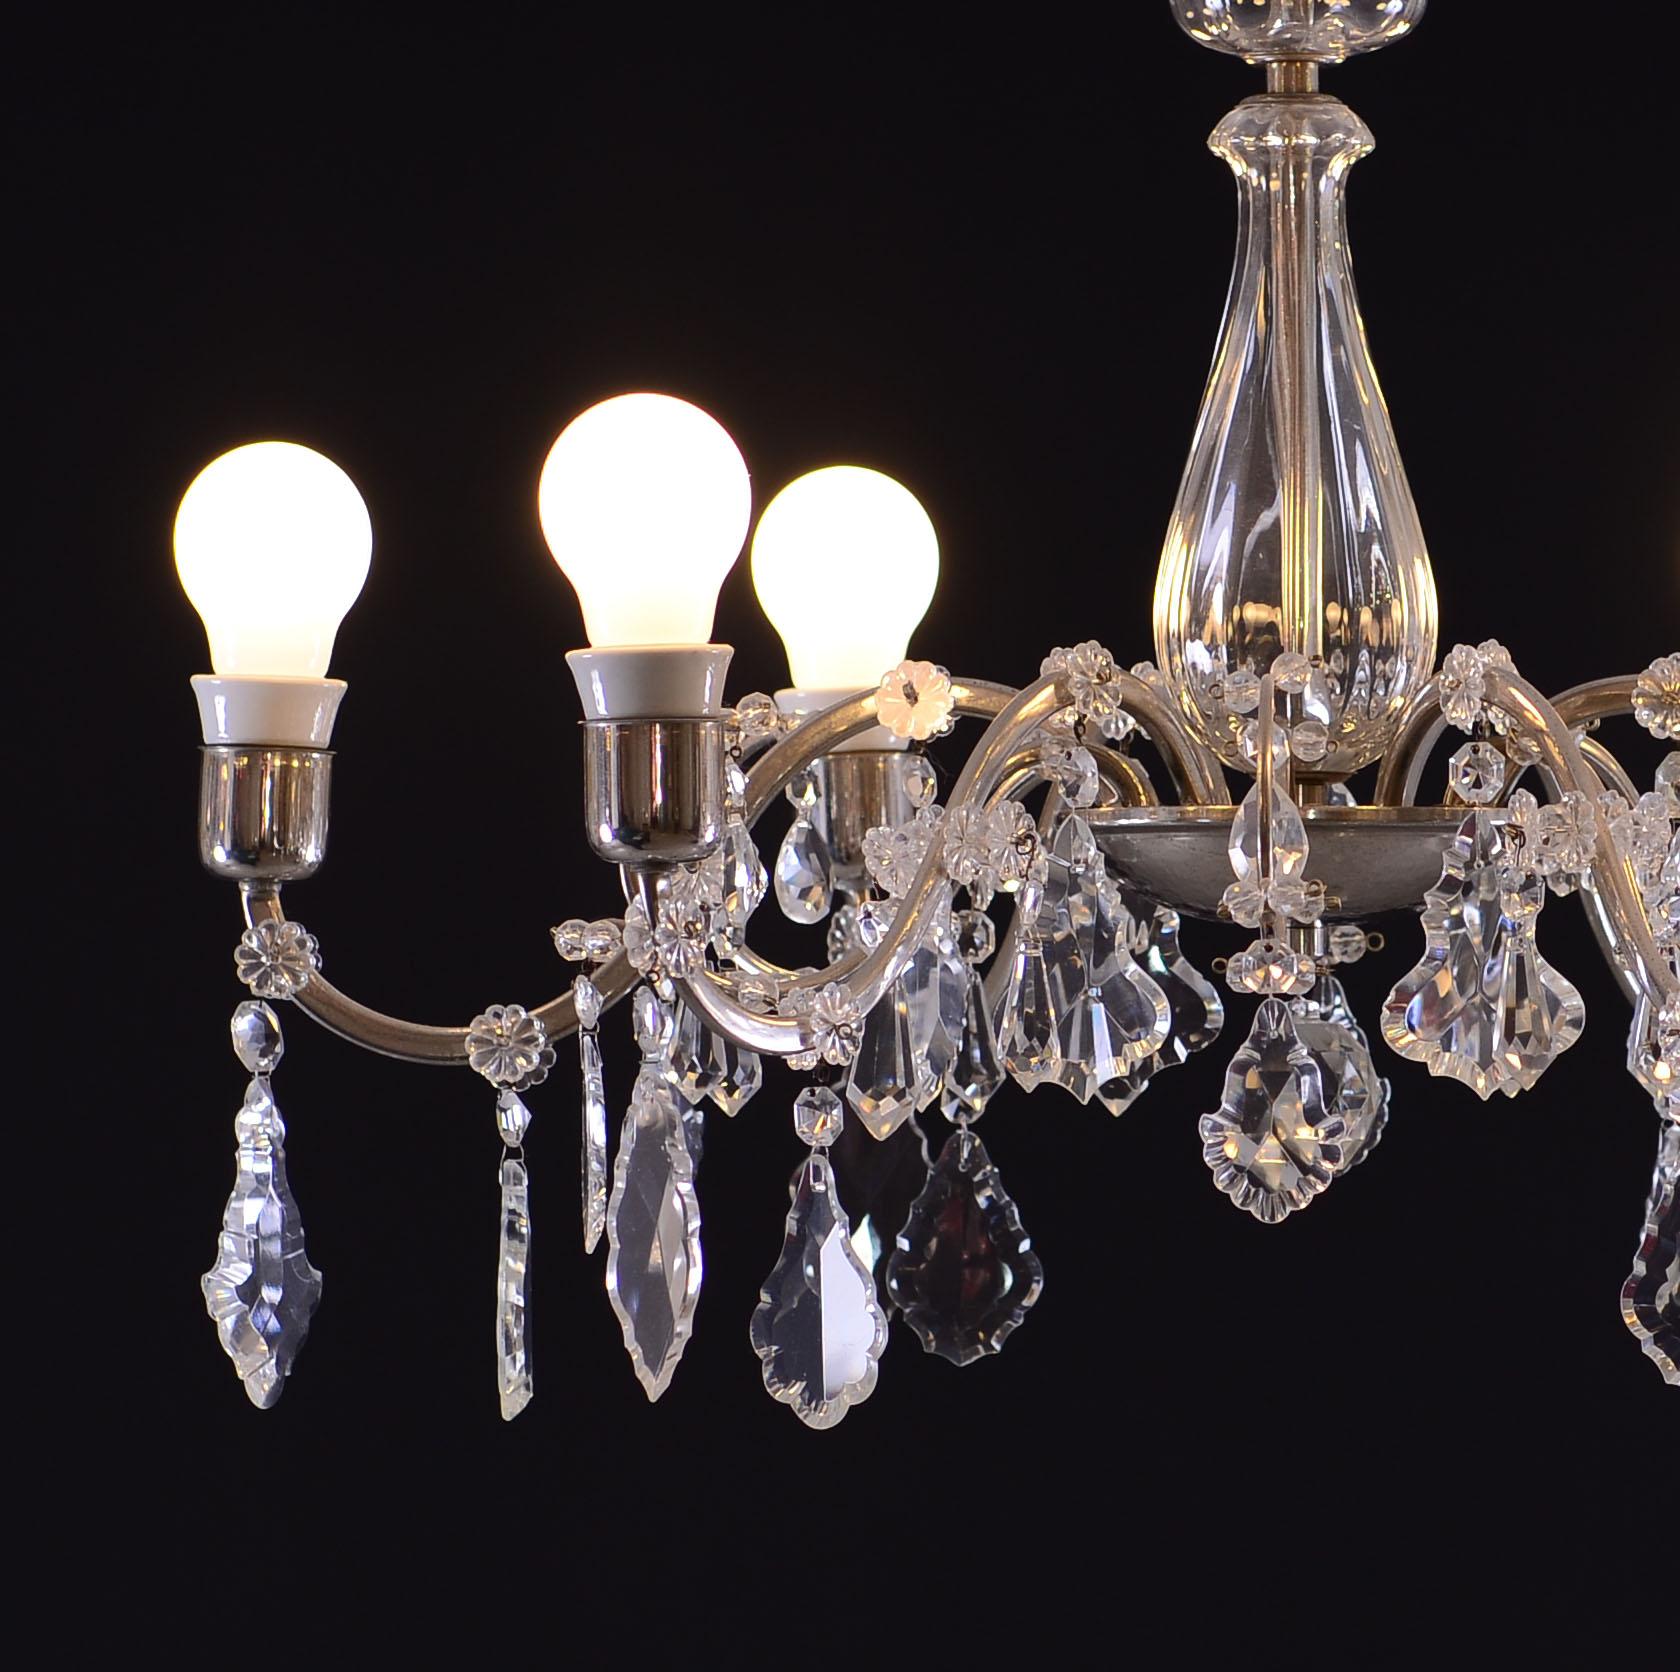 Mid-20th Century Original Mid-Century Modern Brass and Crystal Glass Chandelier For Sale